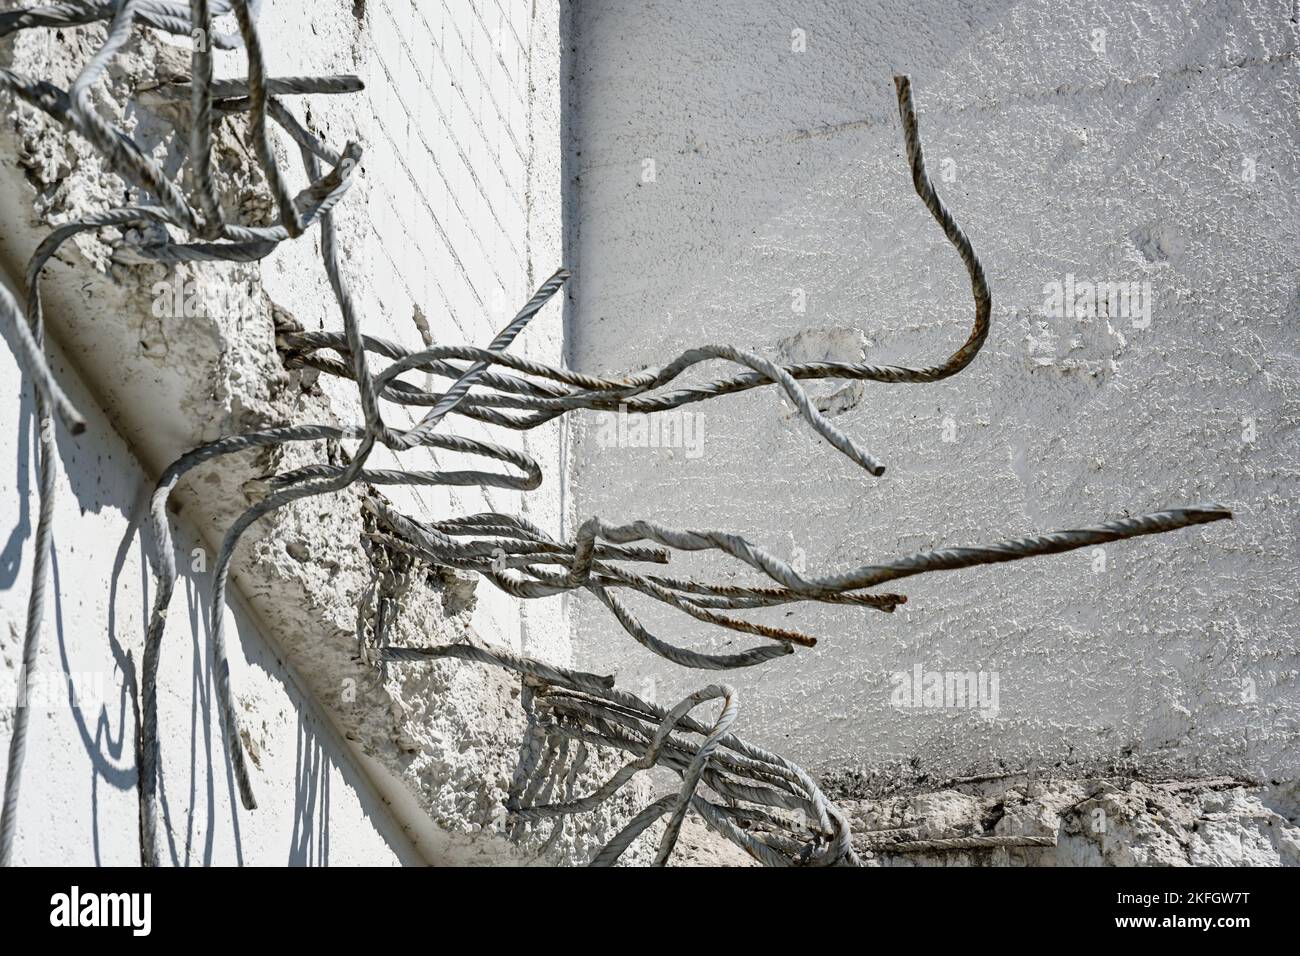 Rebars from iron stick out of a bright concrete wall after demolition, abstract grunge concept for decay or architecture and building themes, copy spa Stock Photo